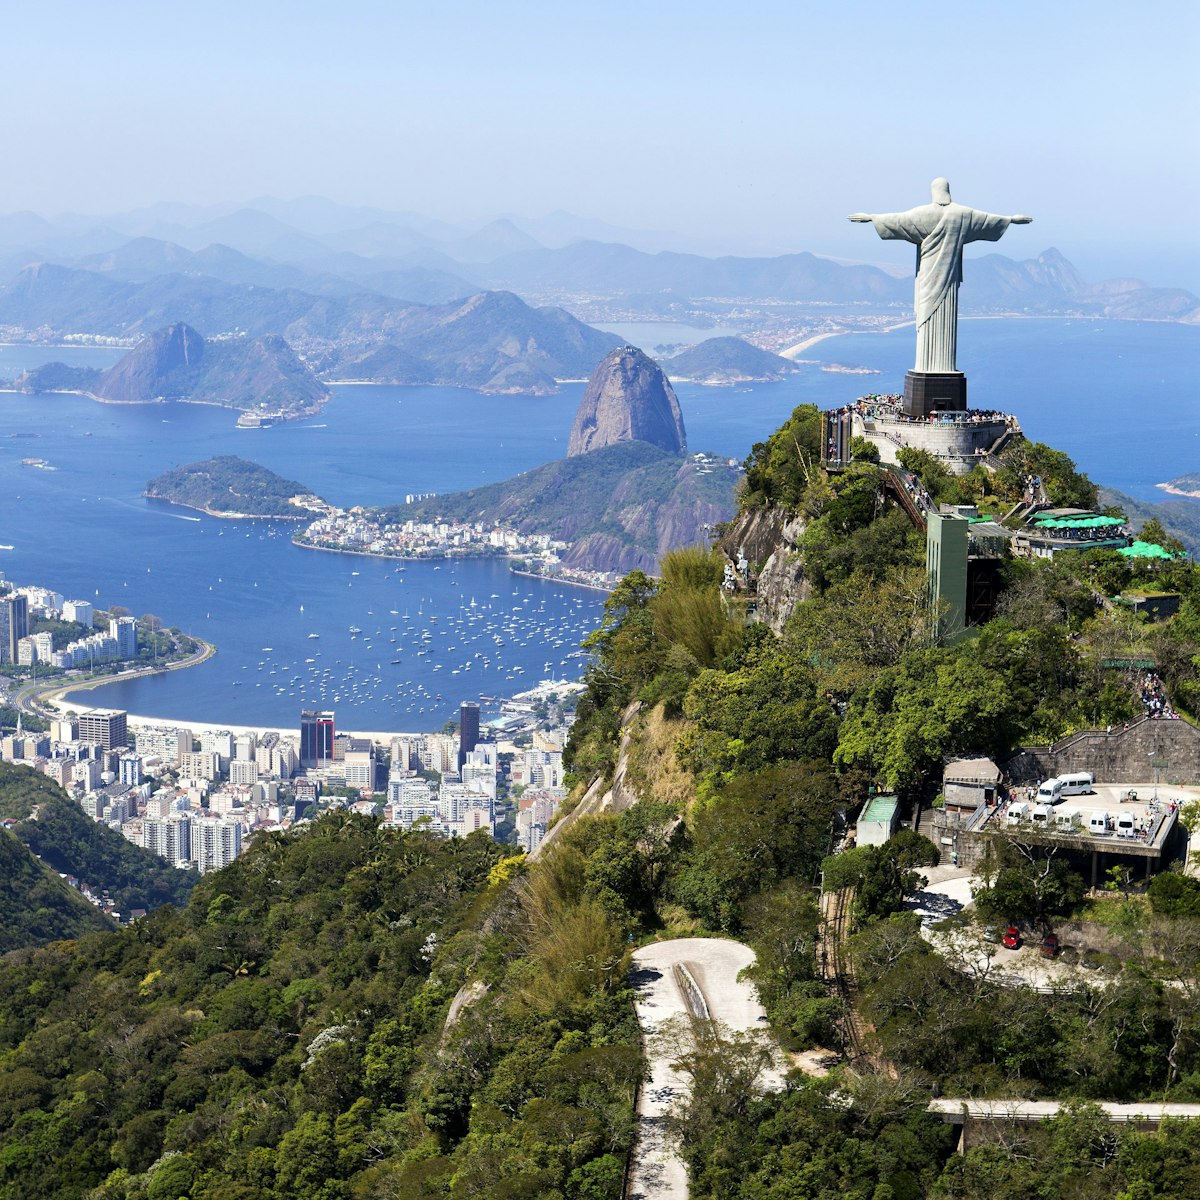 An aerial view of Rio de Janeiro and.the statue of Christ the Redeemer.